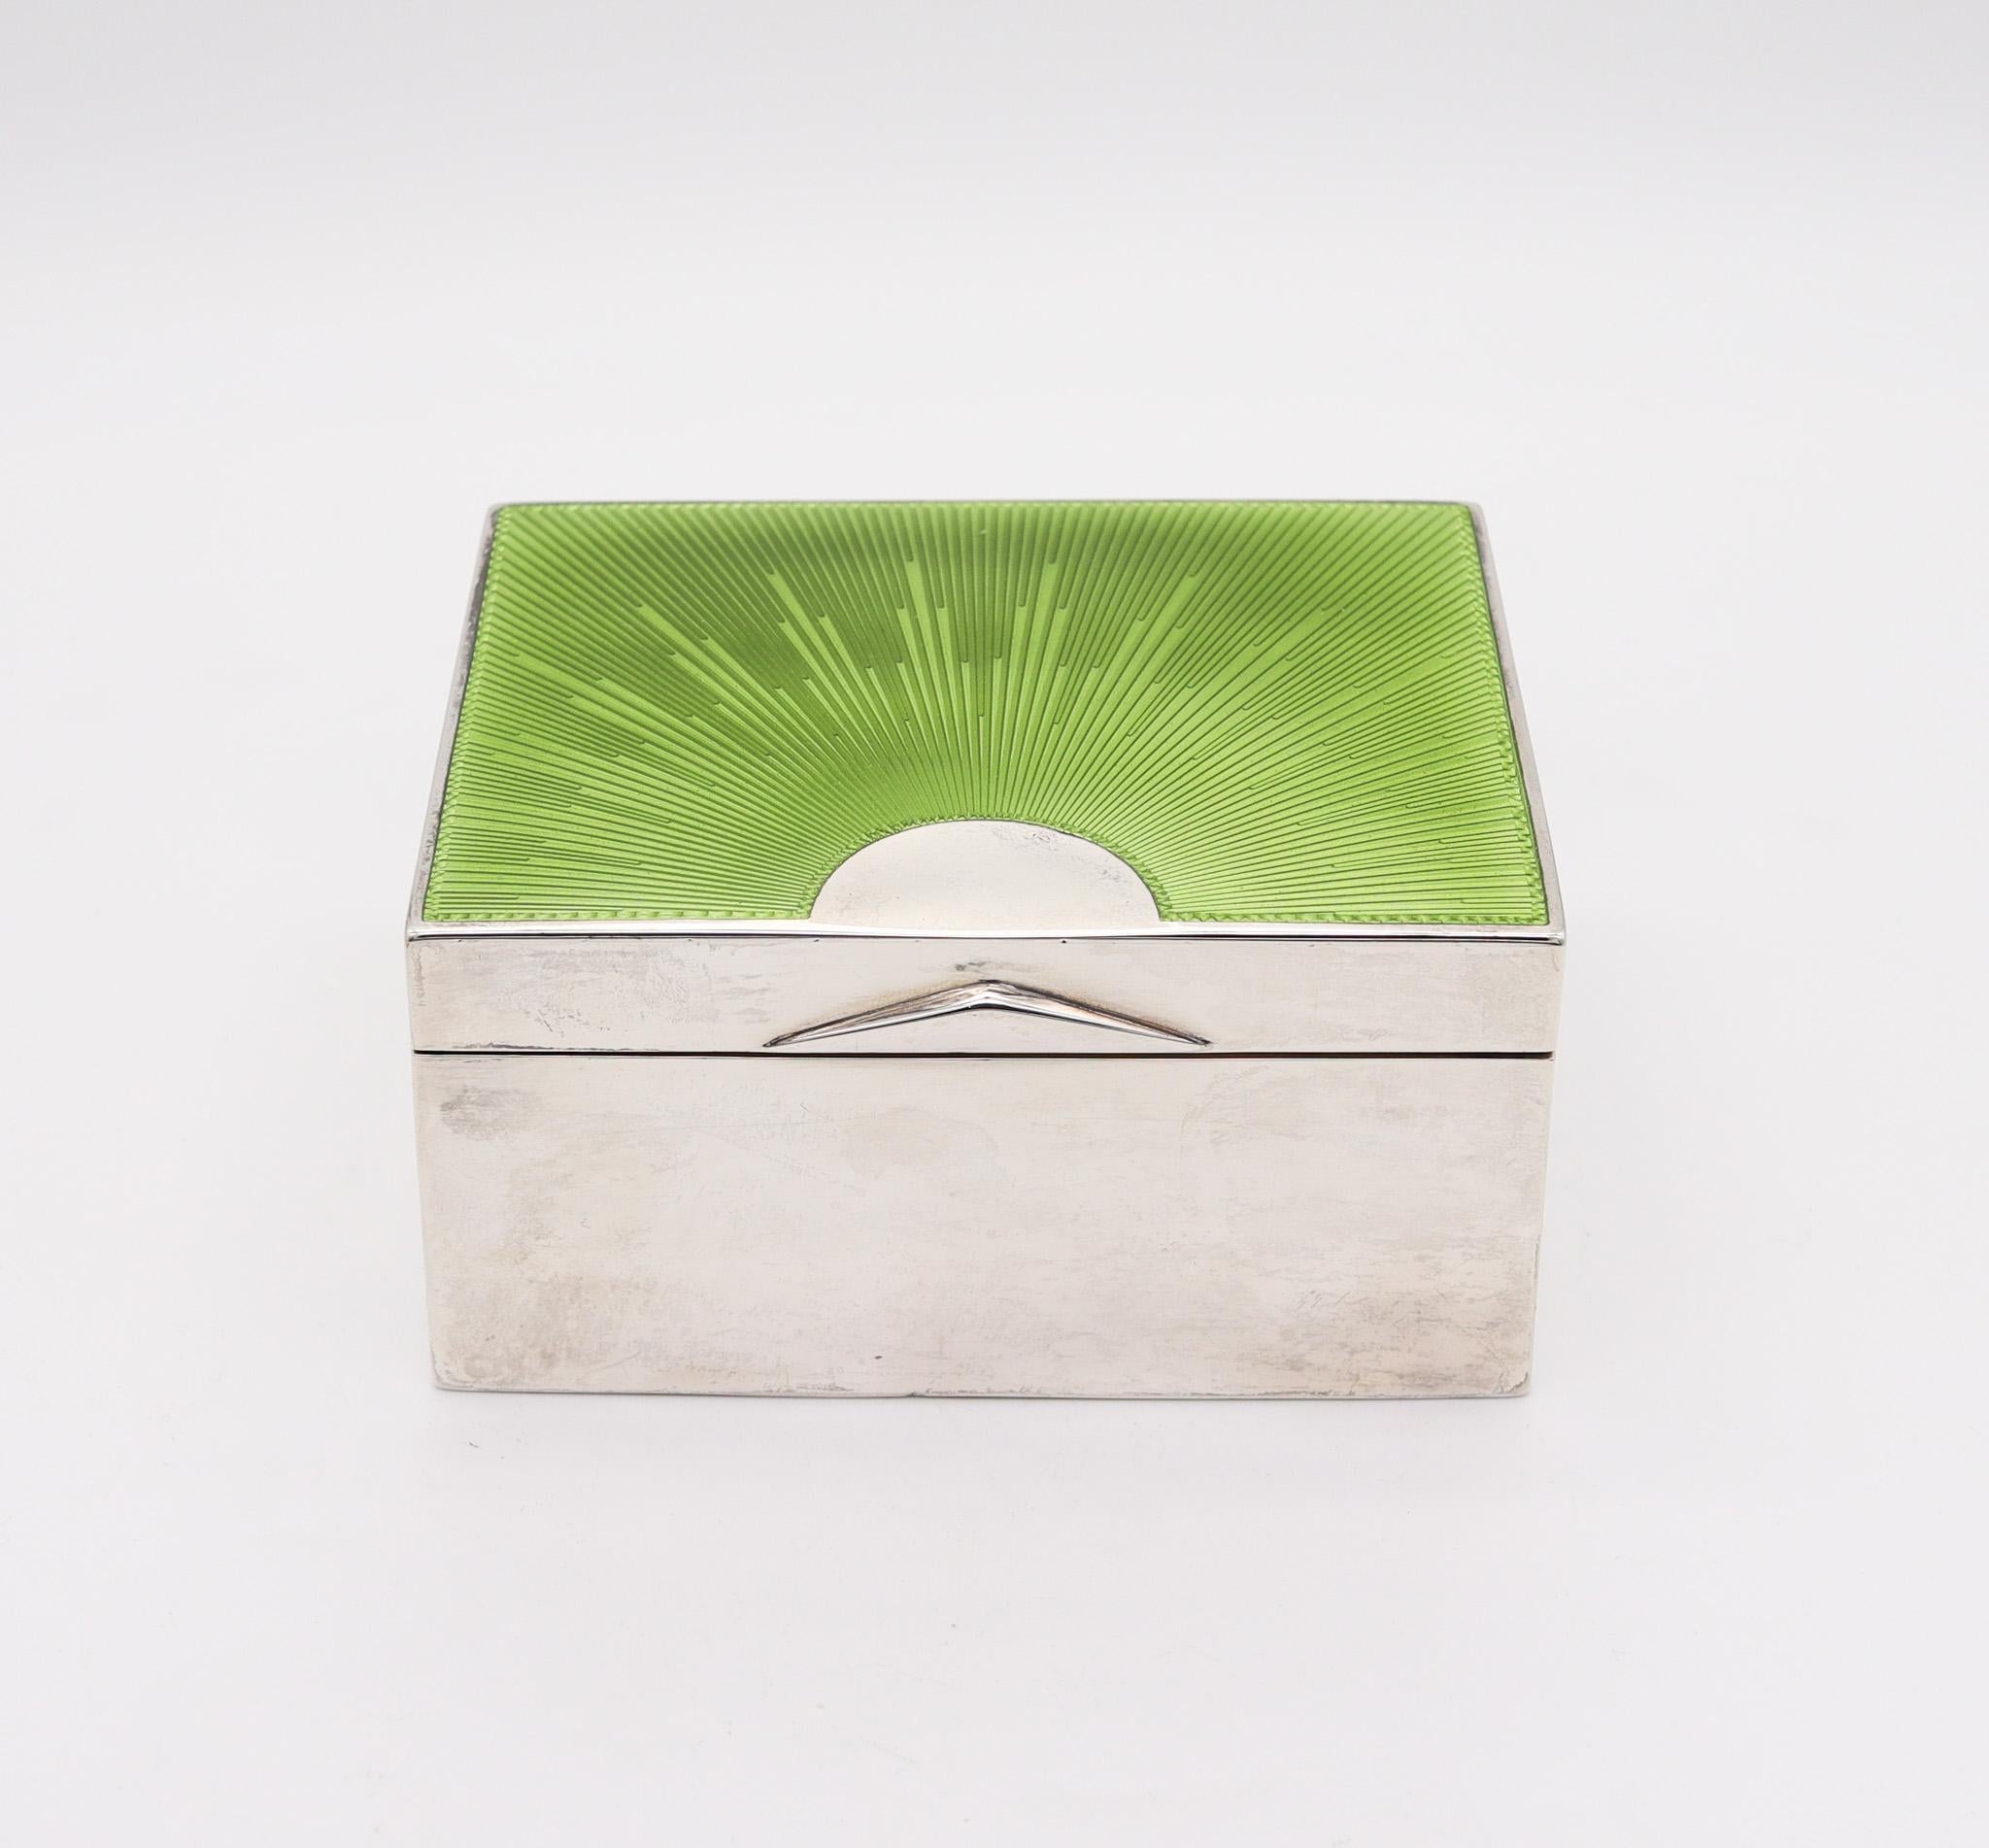 Enamelled box in silver designed by George Adam Scheid (1837-1921).

A very beautiful rectangular desk box, created in Vienna Austria by George Adam Scheid back in the late 19th century, circa 1895. This box is in mint condition, is very rare and